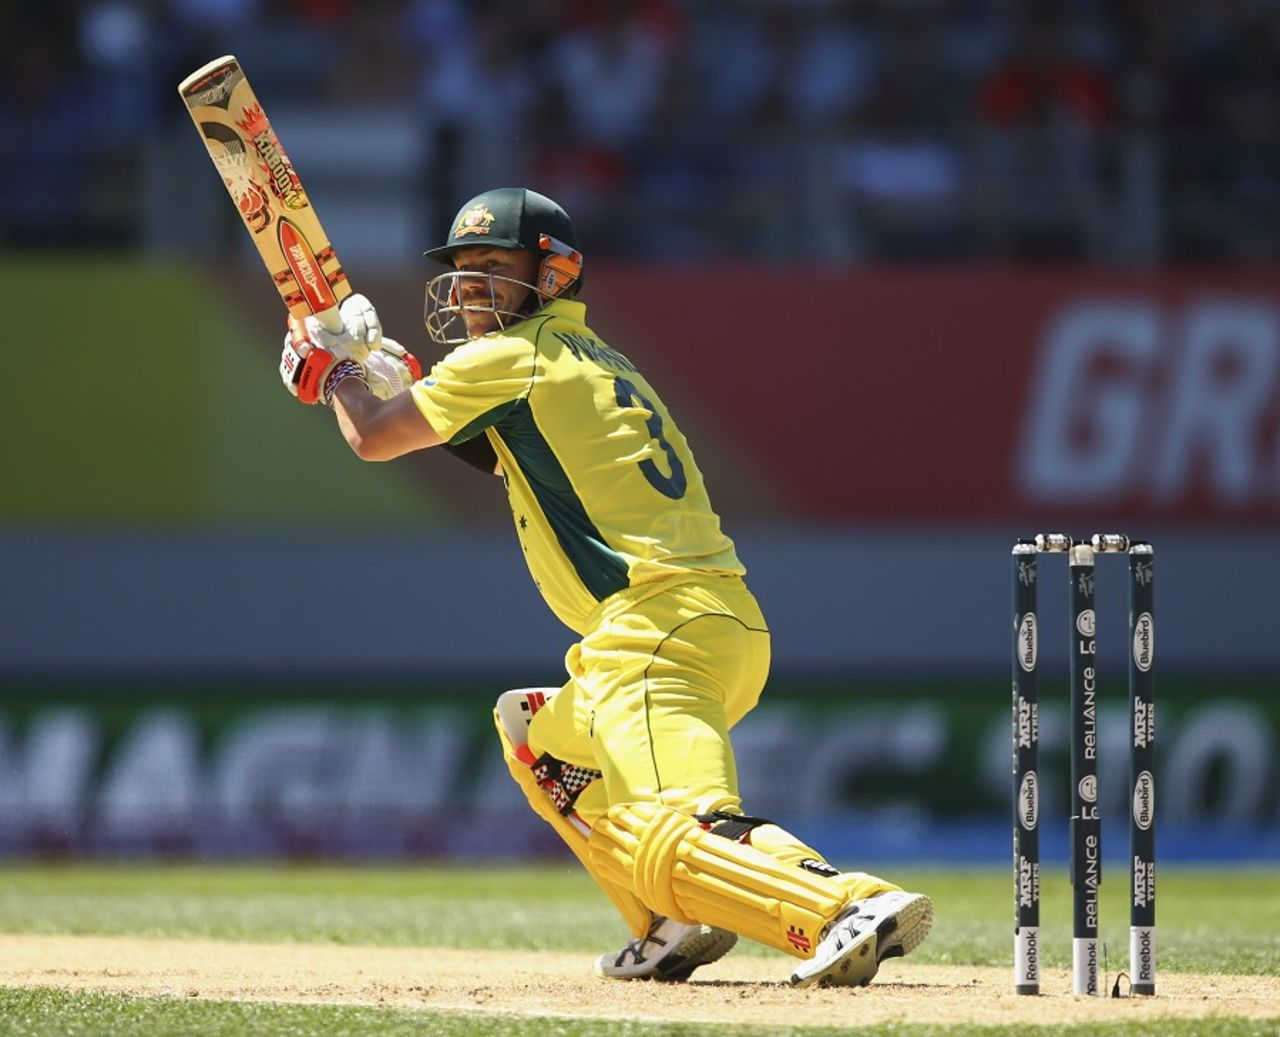 David Warner guides the ball through the off side, New Zealand v Australia, World Cup 2015, Group A, Auckland, February 28, 2015